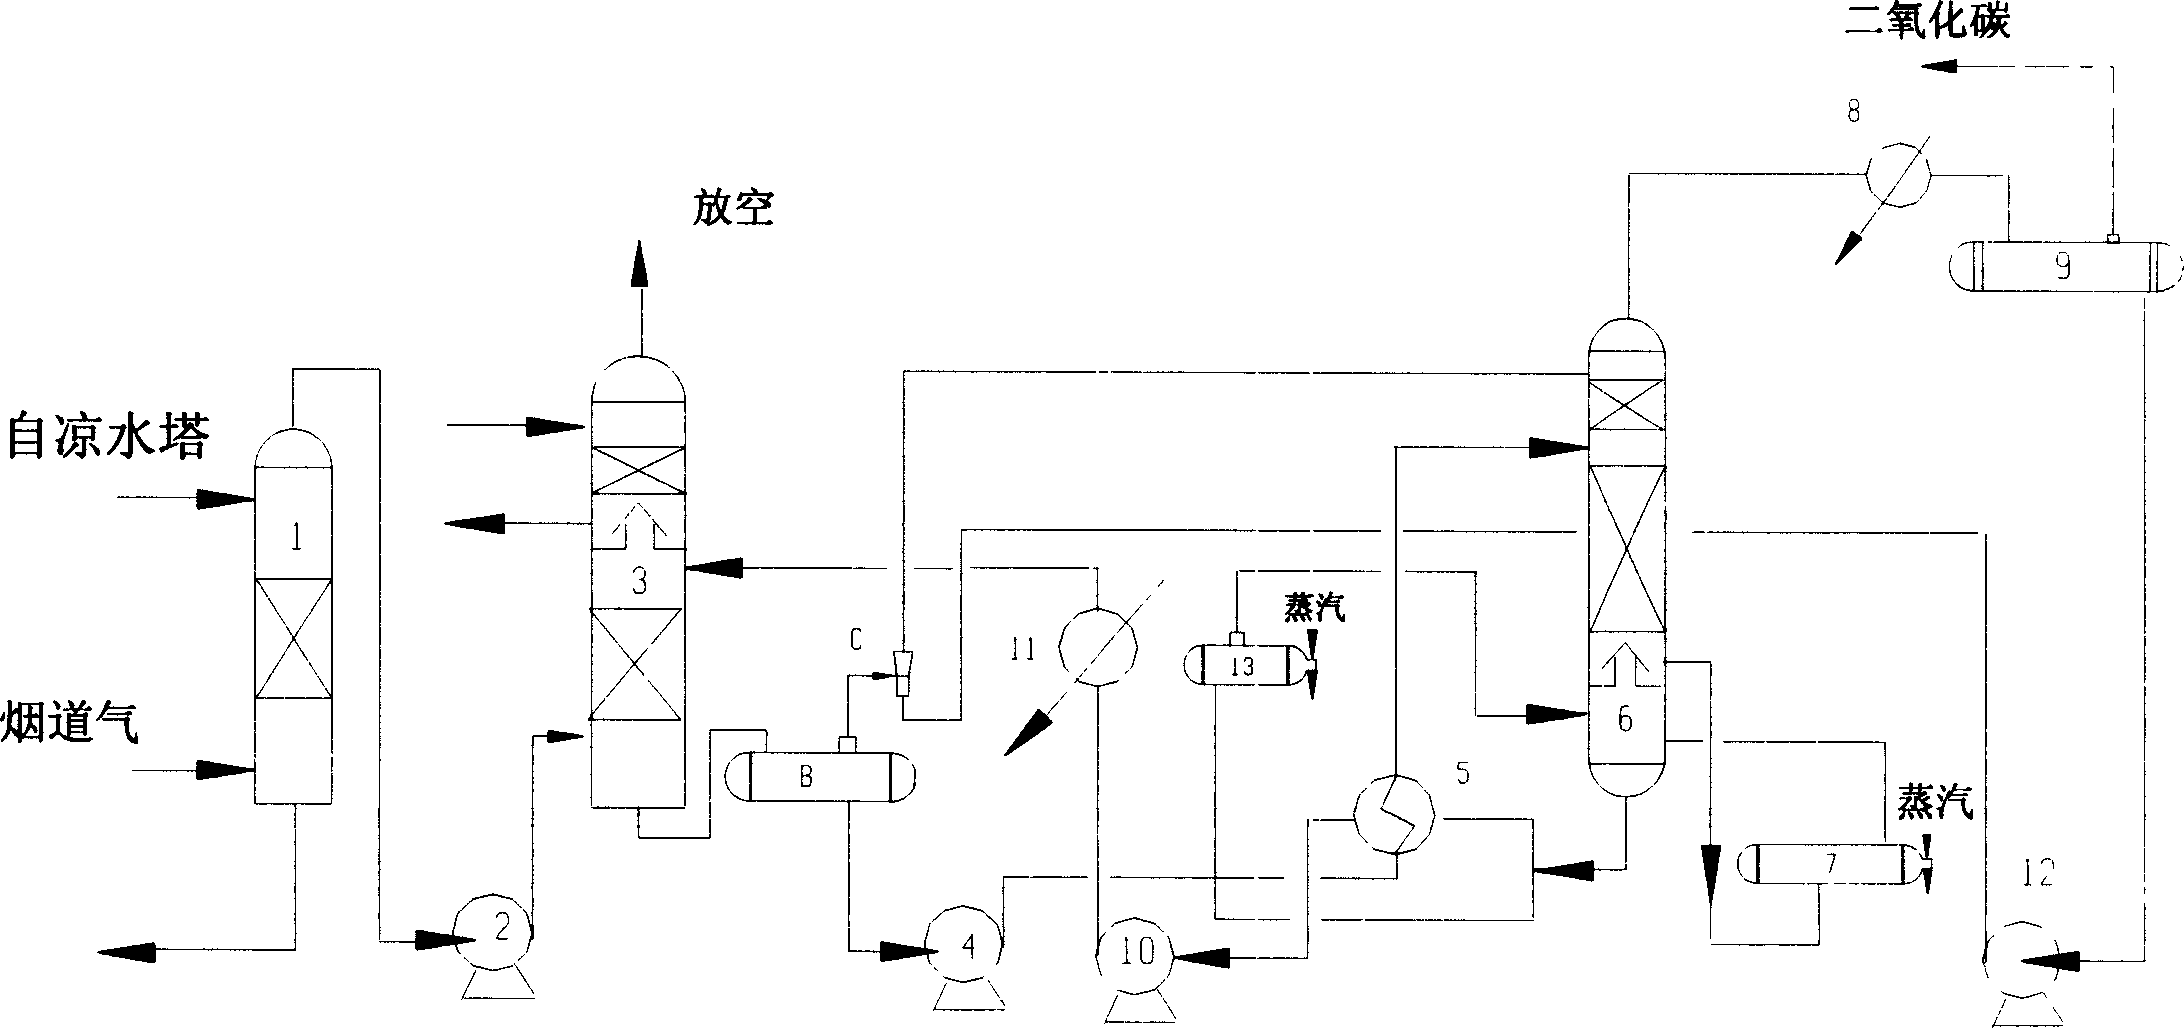 Process of removing and recovering CO2 from fume